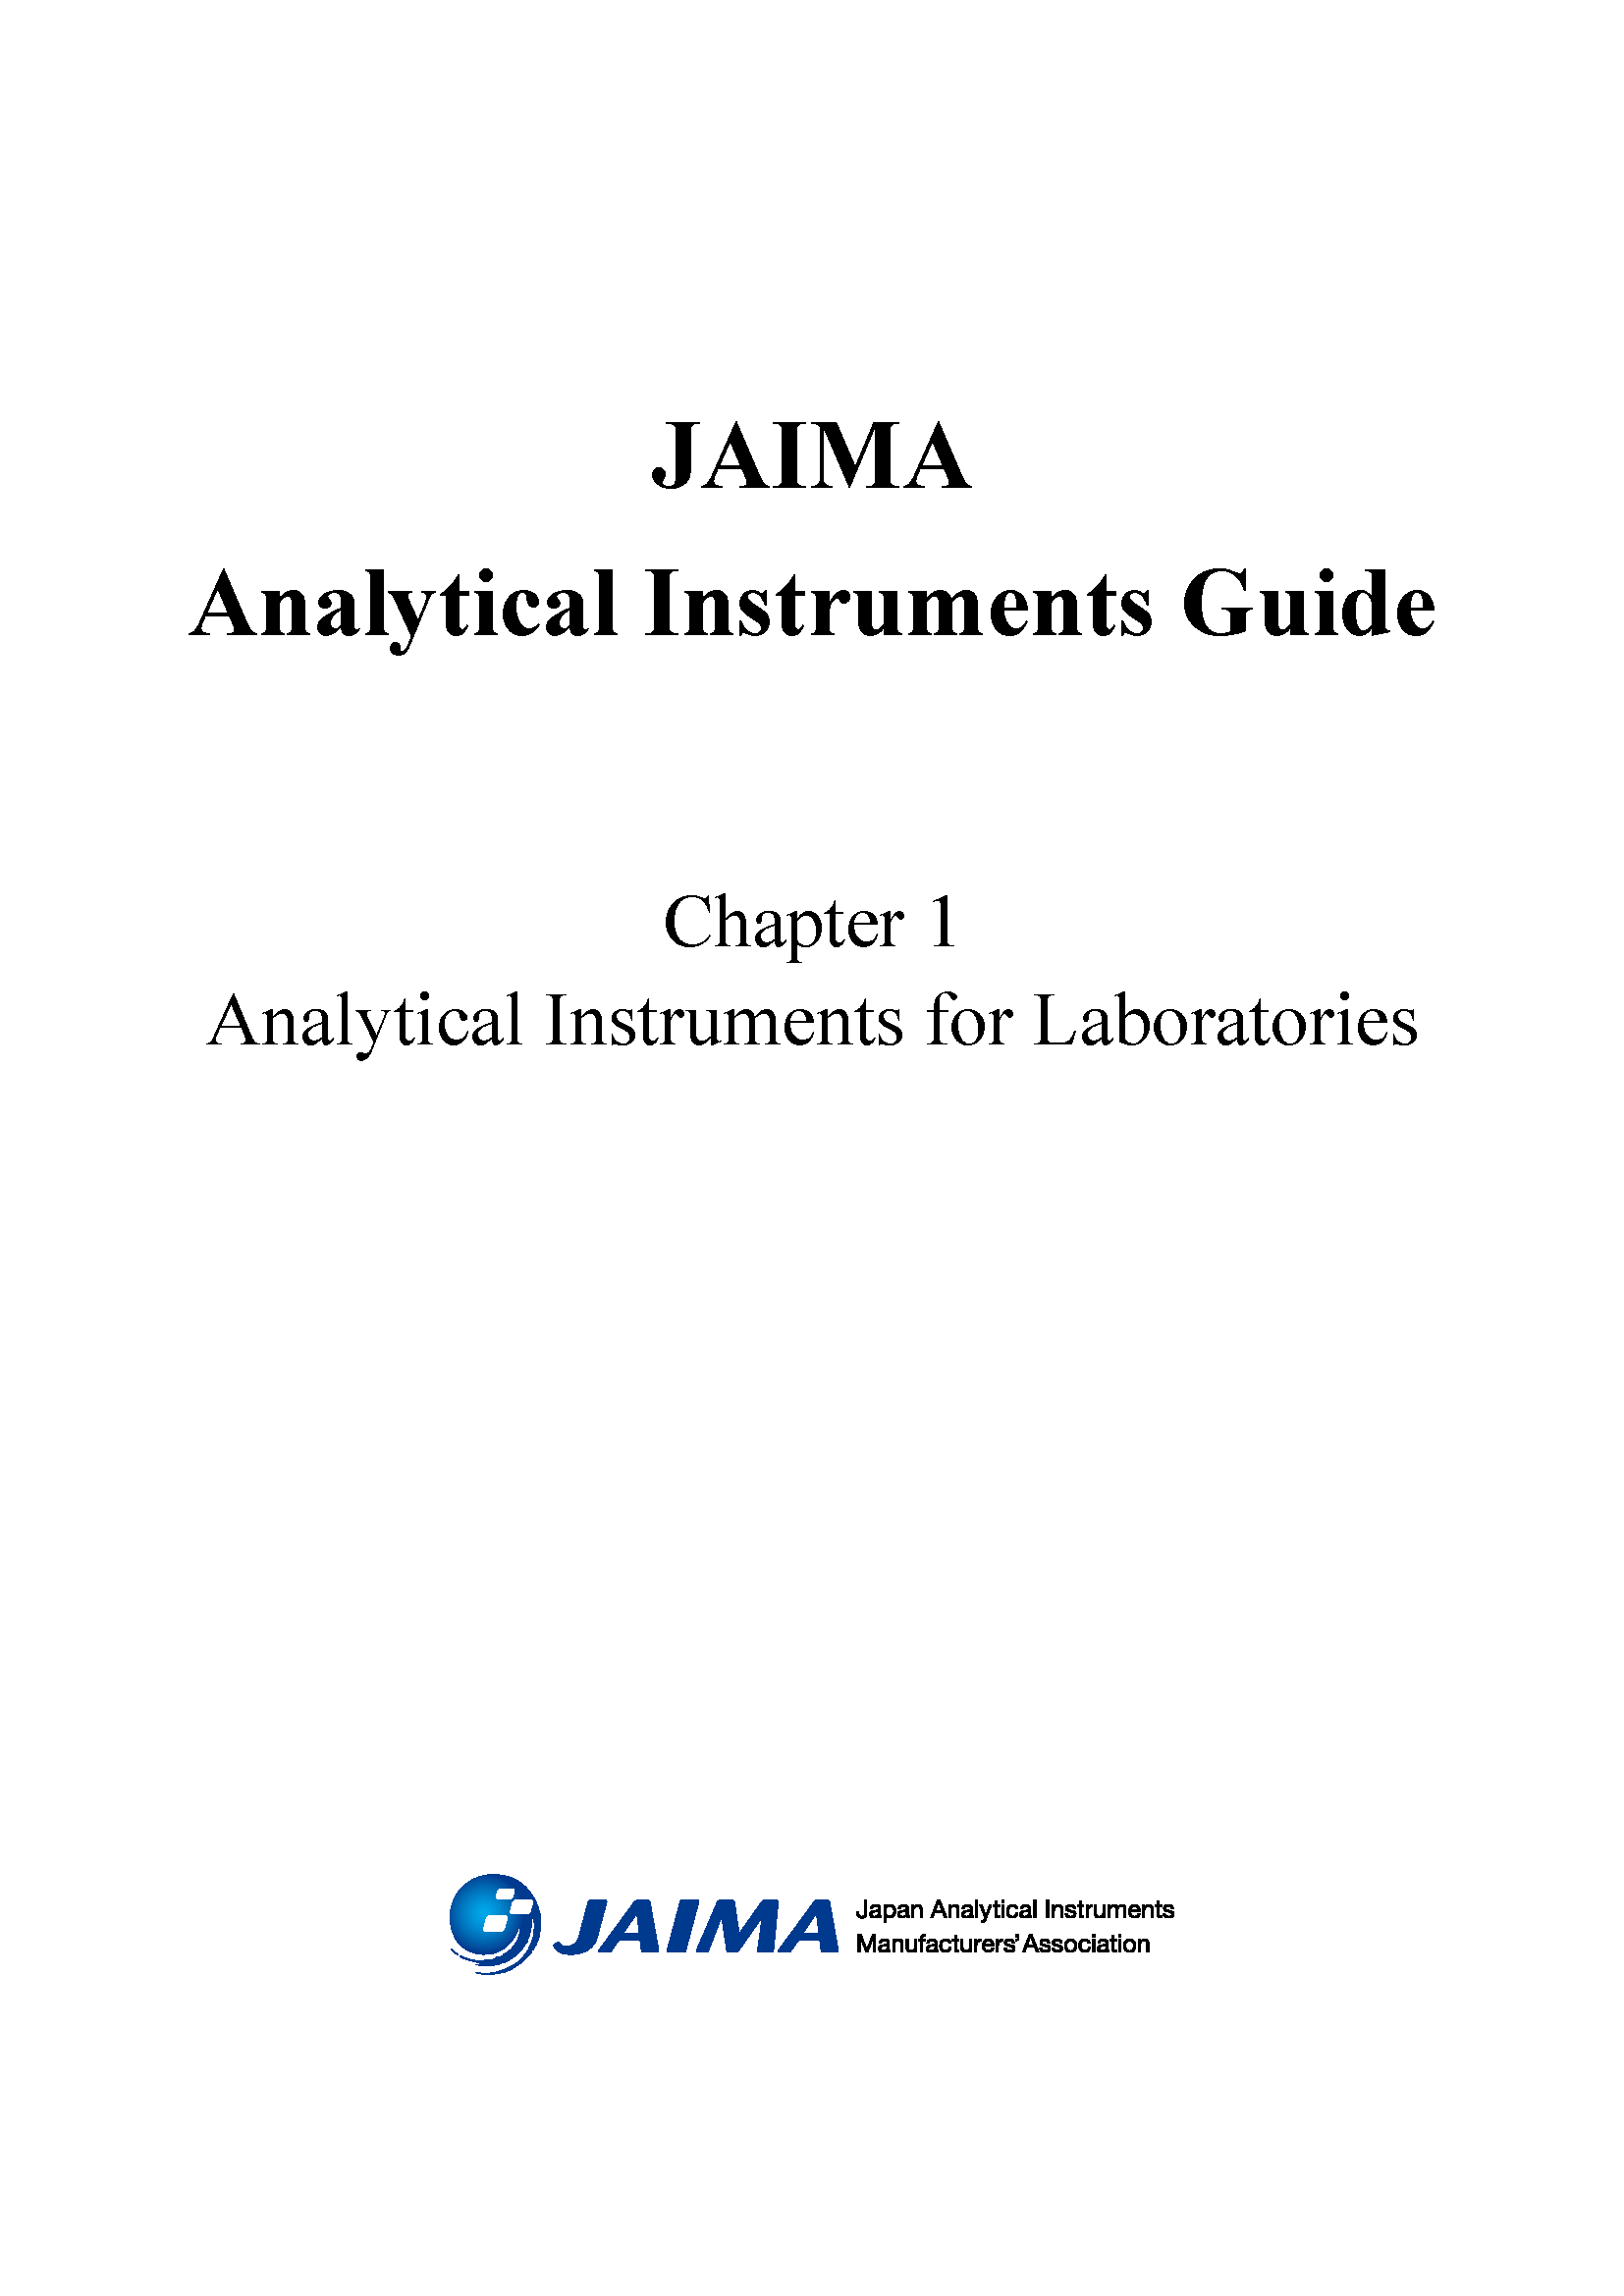 JAIMA
Analytical Instruments Guide - Chap.1 Analytical Instruments for Laboratories